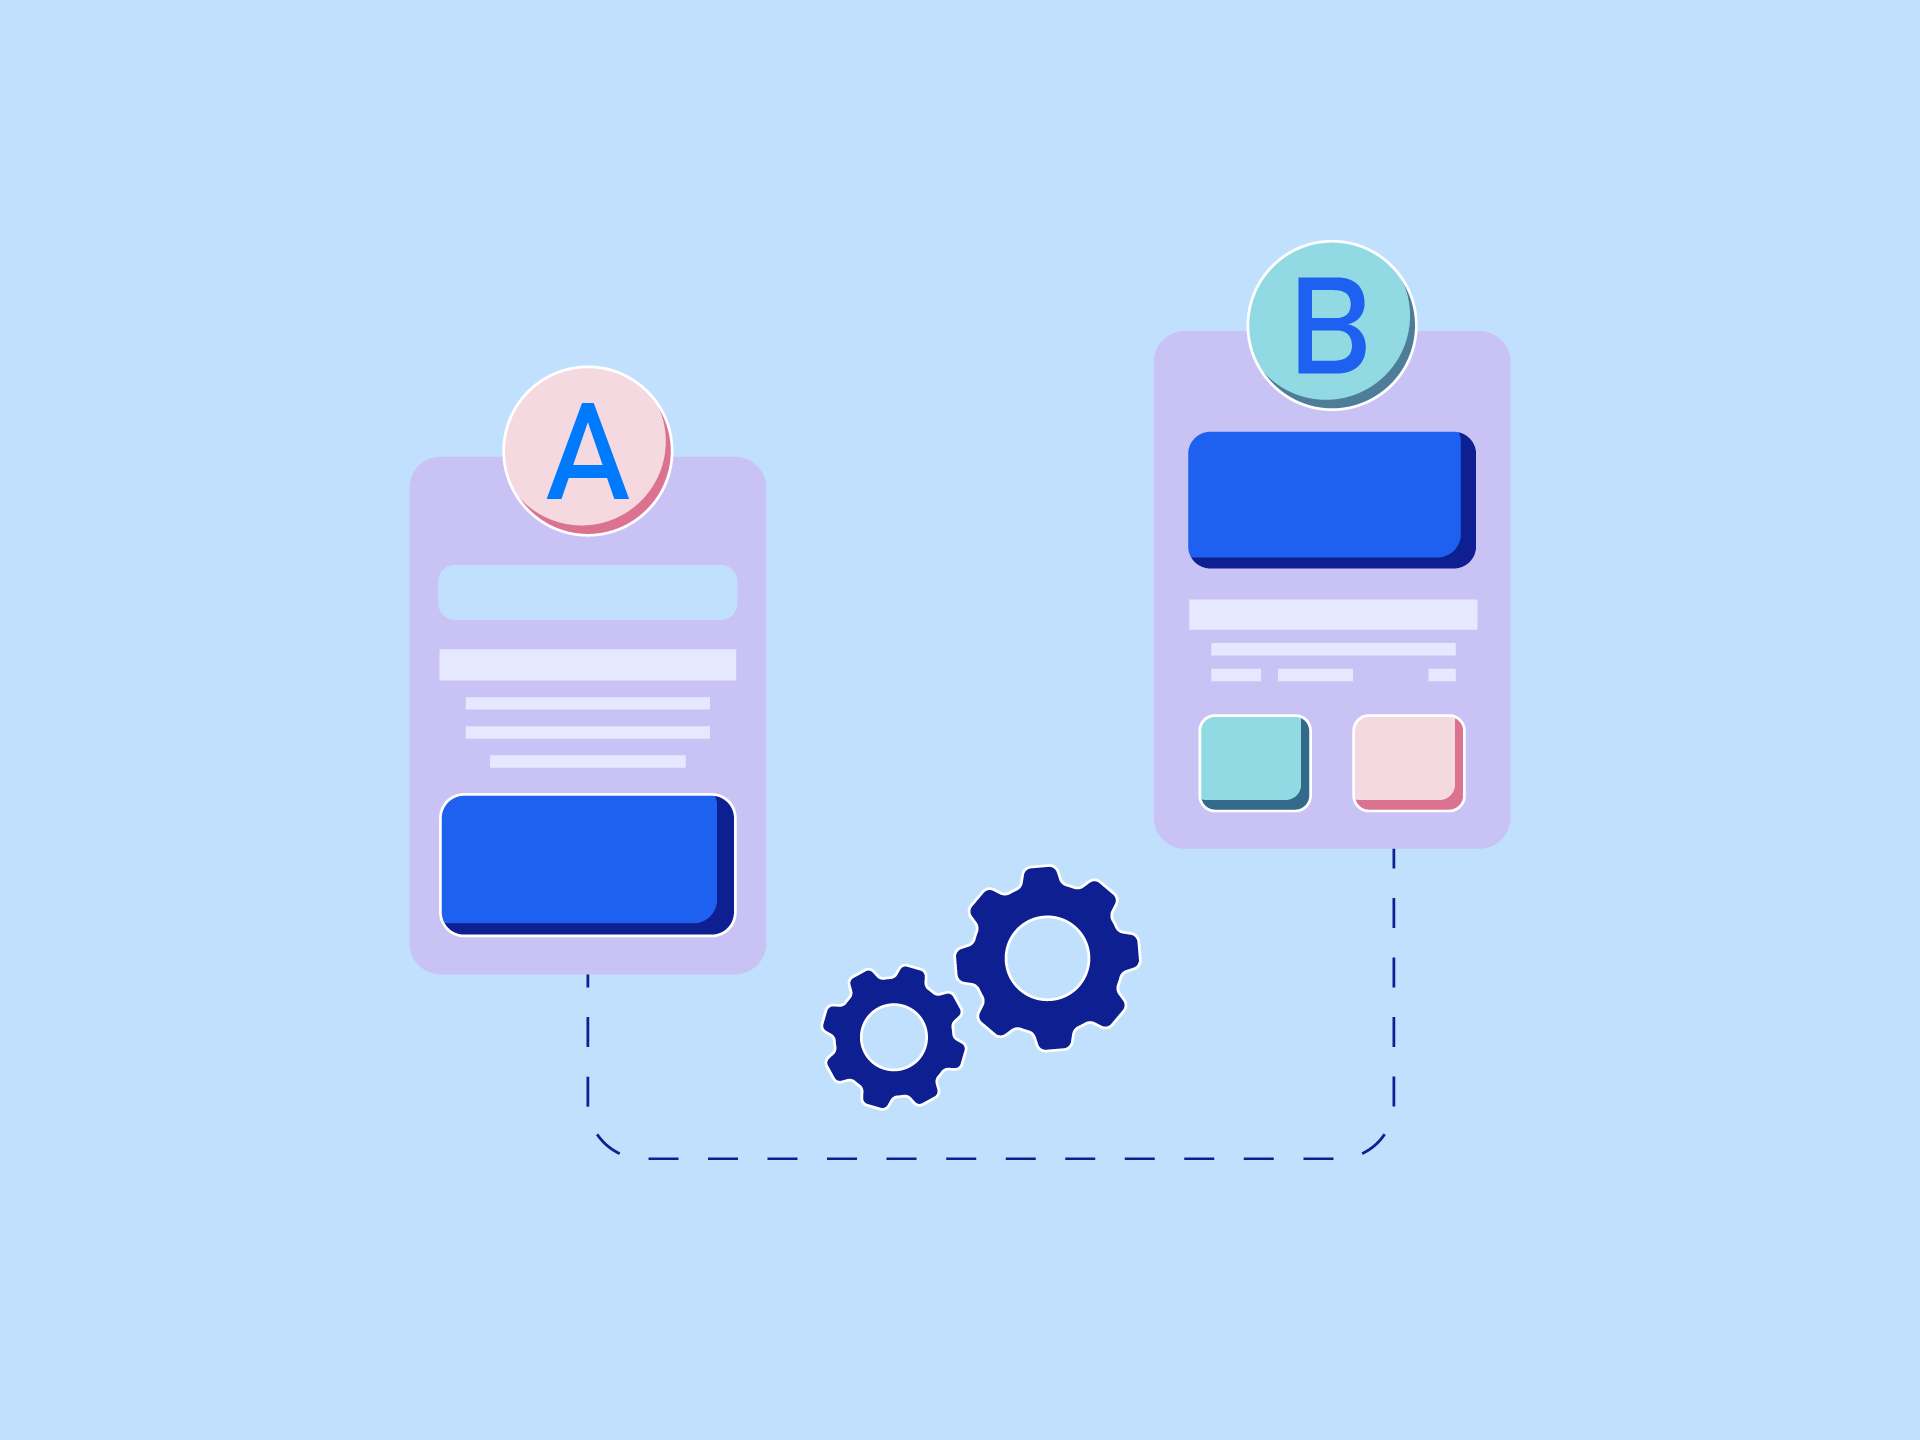 Abstract image of A/B testing different layouts